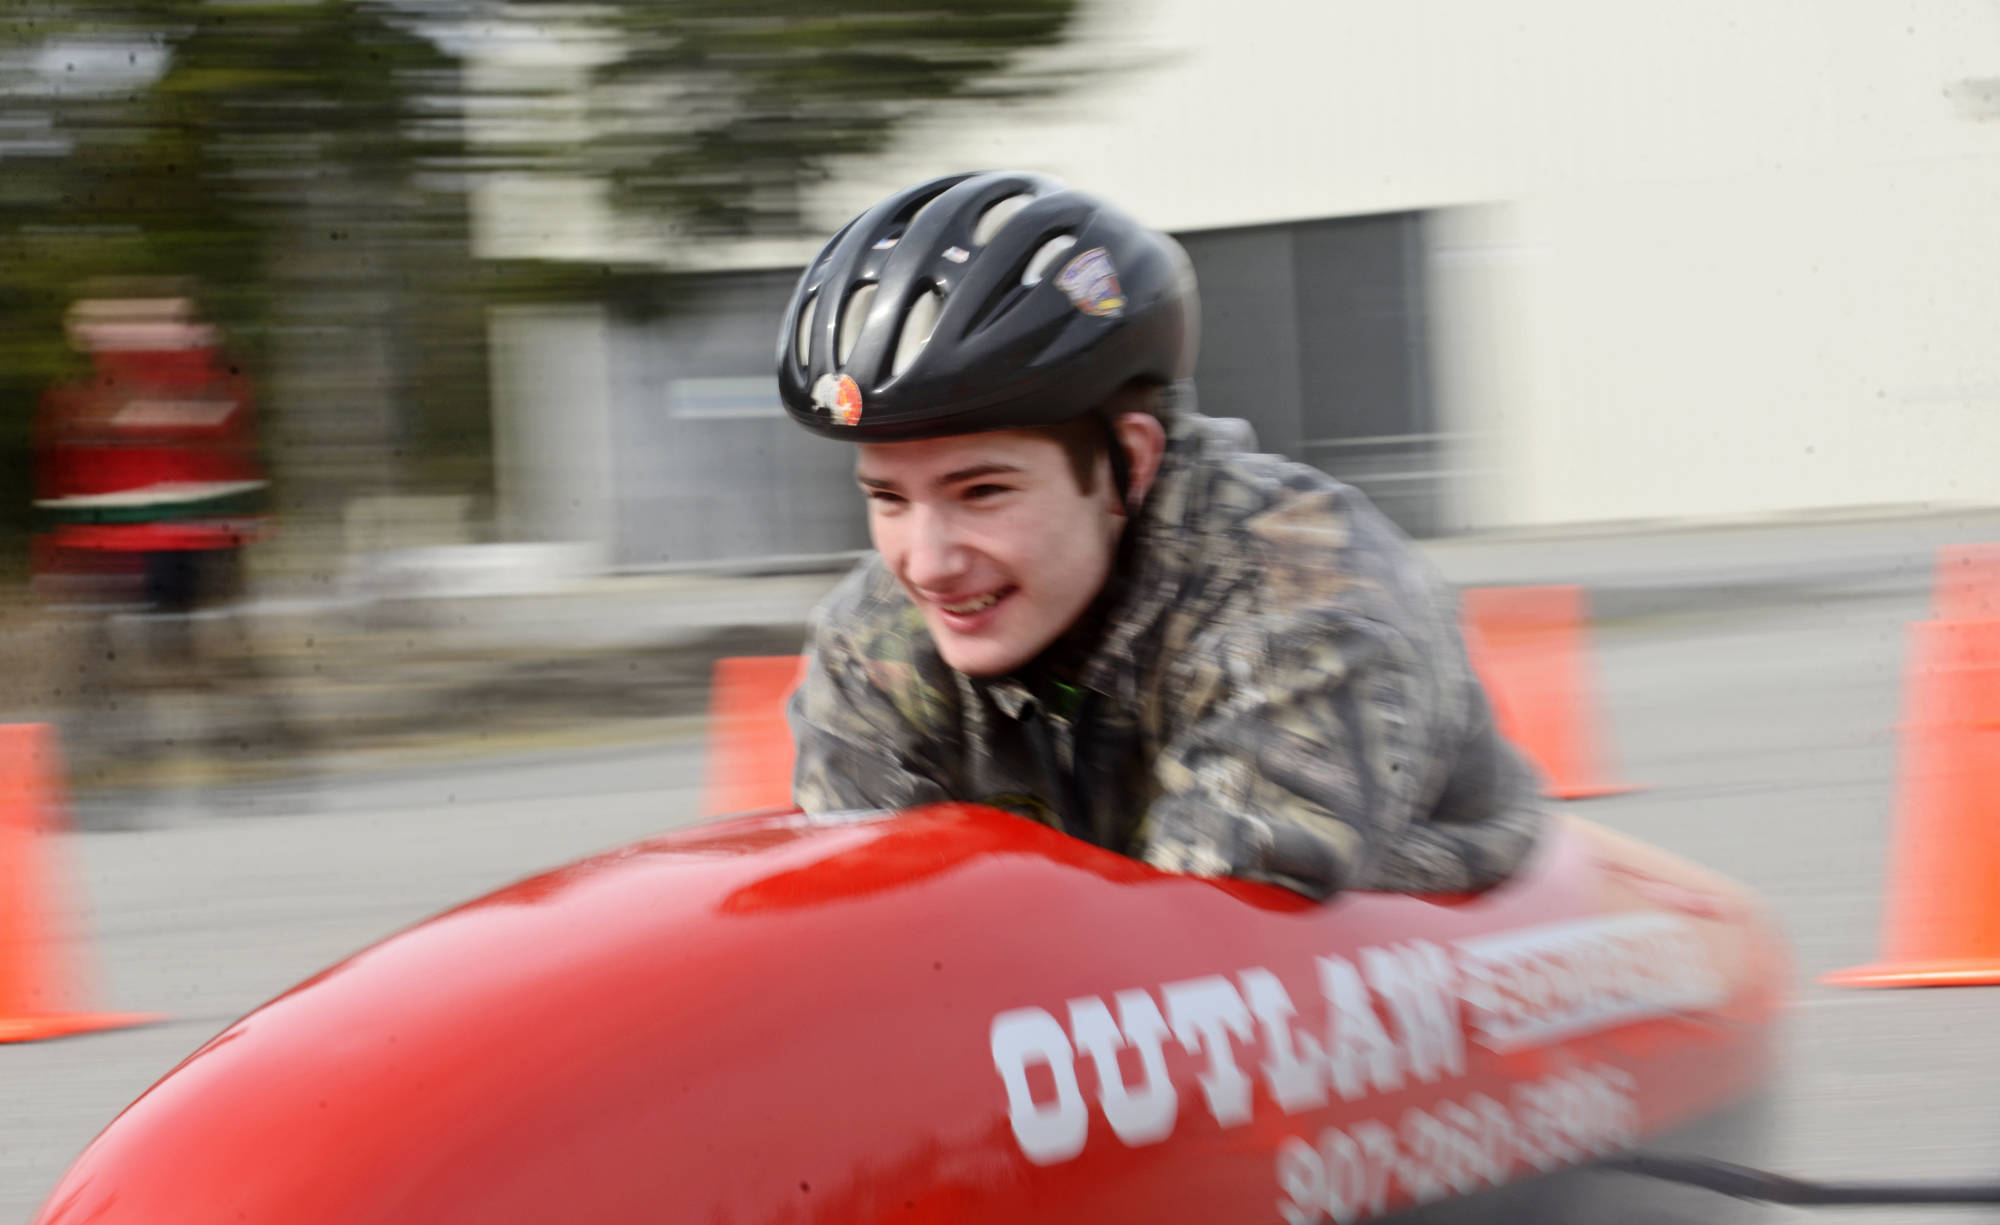 Alexander Van De Grift races in the Kenai Rotary Club’s 12th anual Soapbox Derby on Saturday, May 12, 2018 at the Challenger Learning Center in Kenai, Alaska. Van De Grift won a craftsmanship trophy for his car, which was sponsored by Outlaw Body and Paint. (Ben Boettger/Peninsula Clarion).